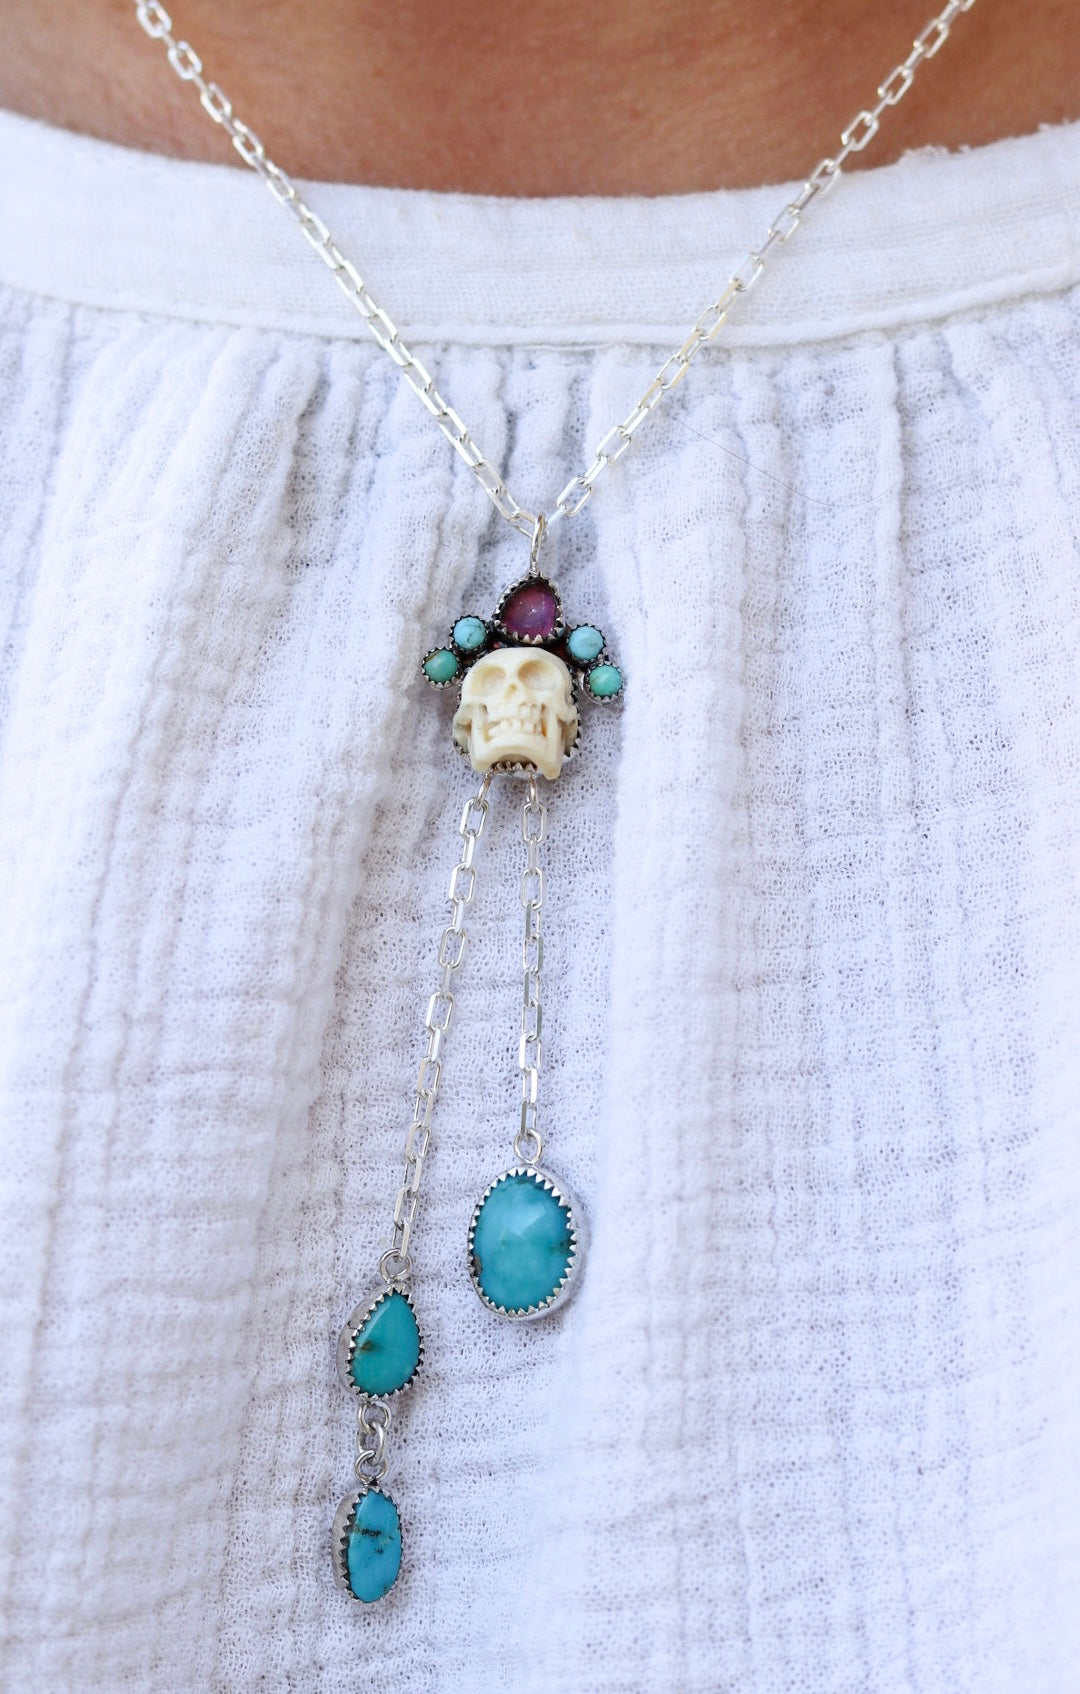 Queen Skull, Tourmaline and Turquoise Necklace